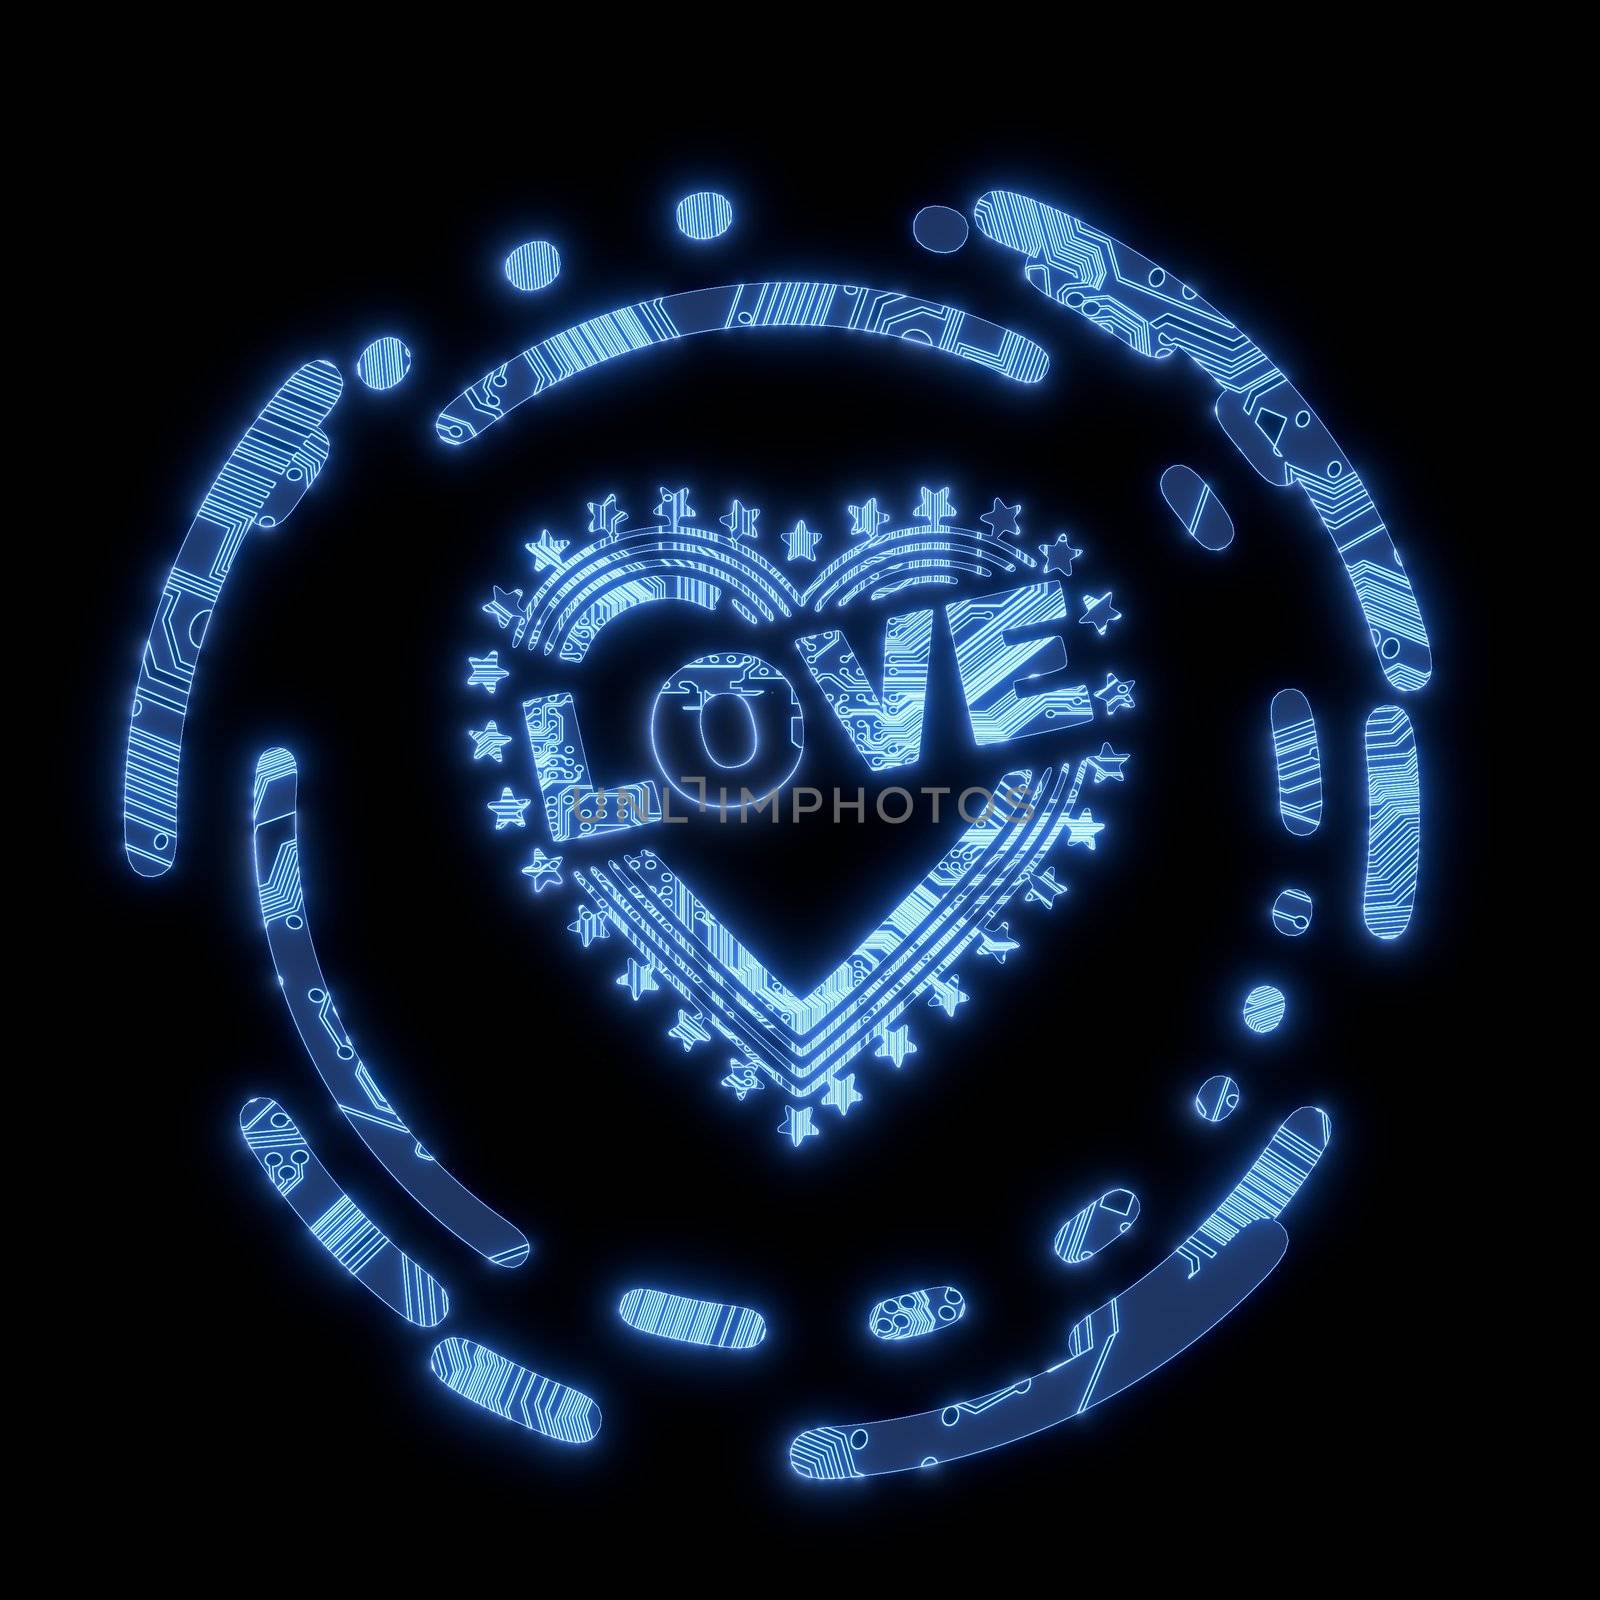 3D Graphic Steel blue computer heart with stars symbol in a dark background on a computer chip